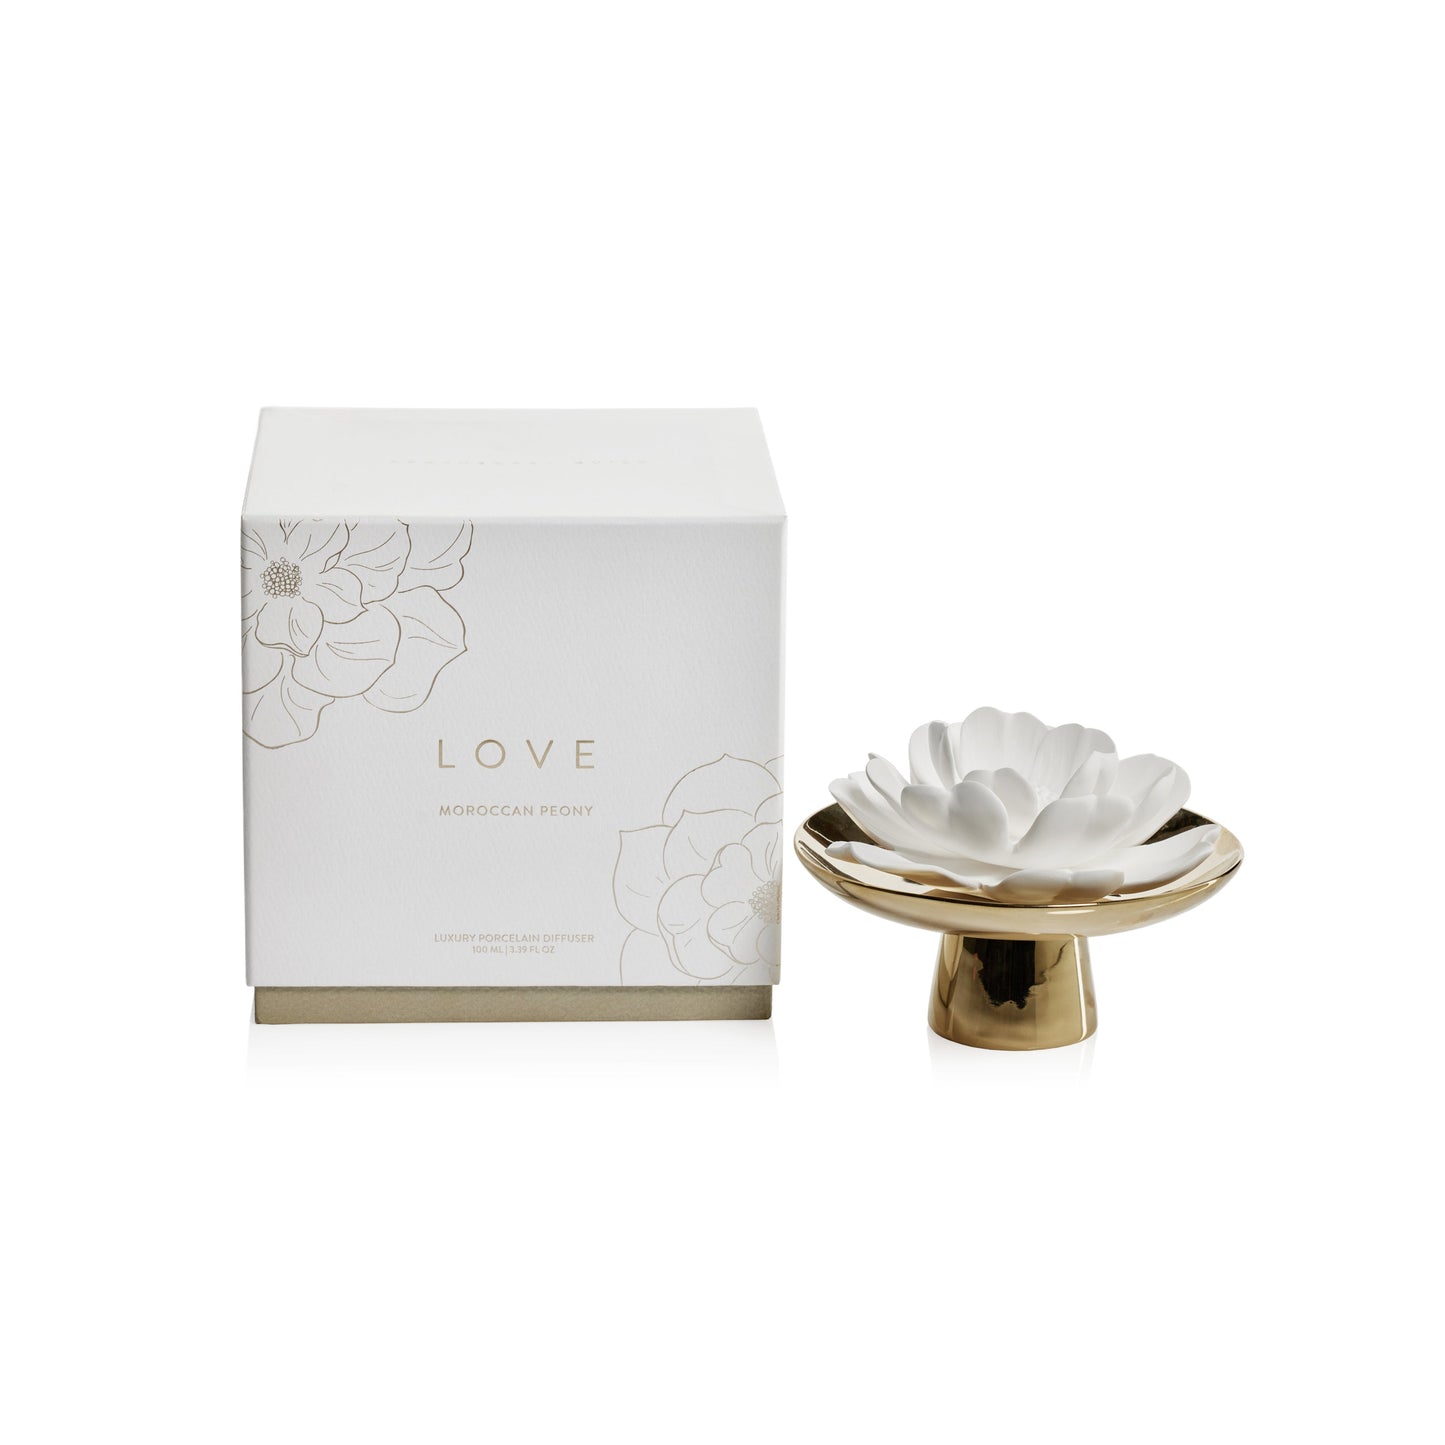 MOROCCAN PEONY  - LOVE Porcelain Zodax Porcelain Diffuser